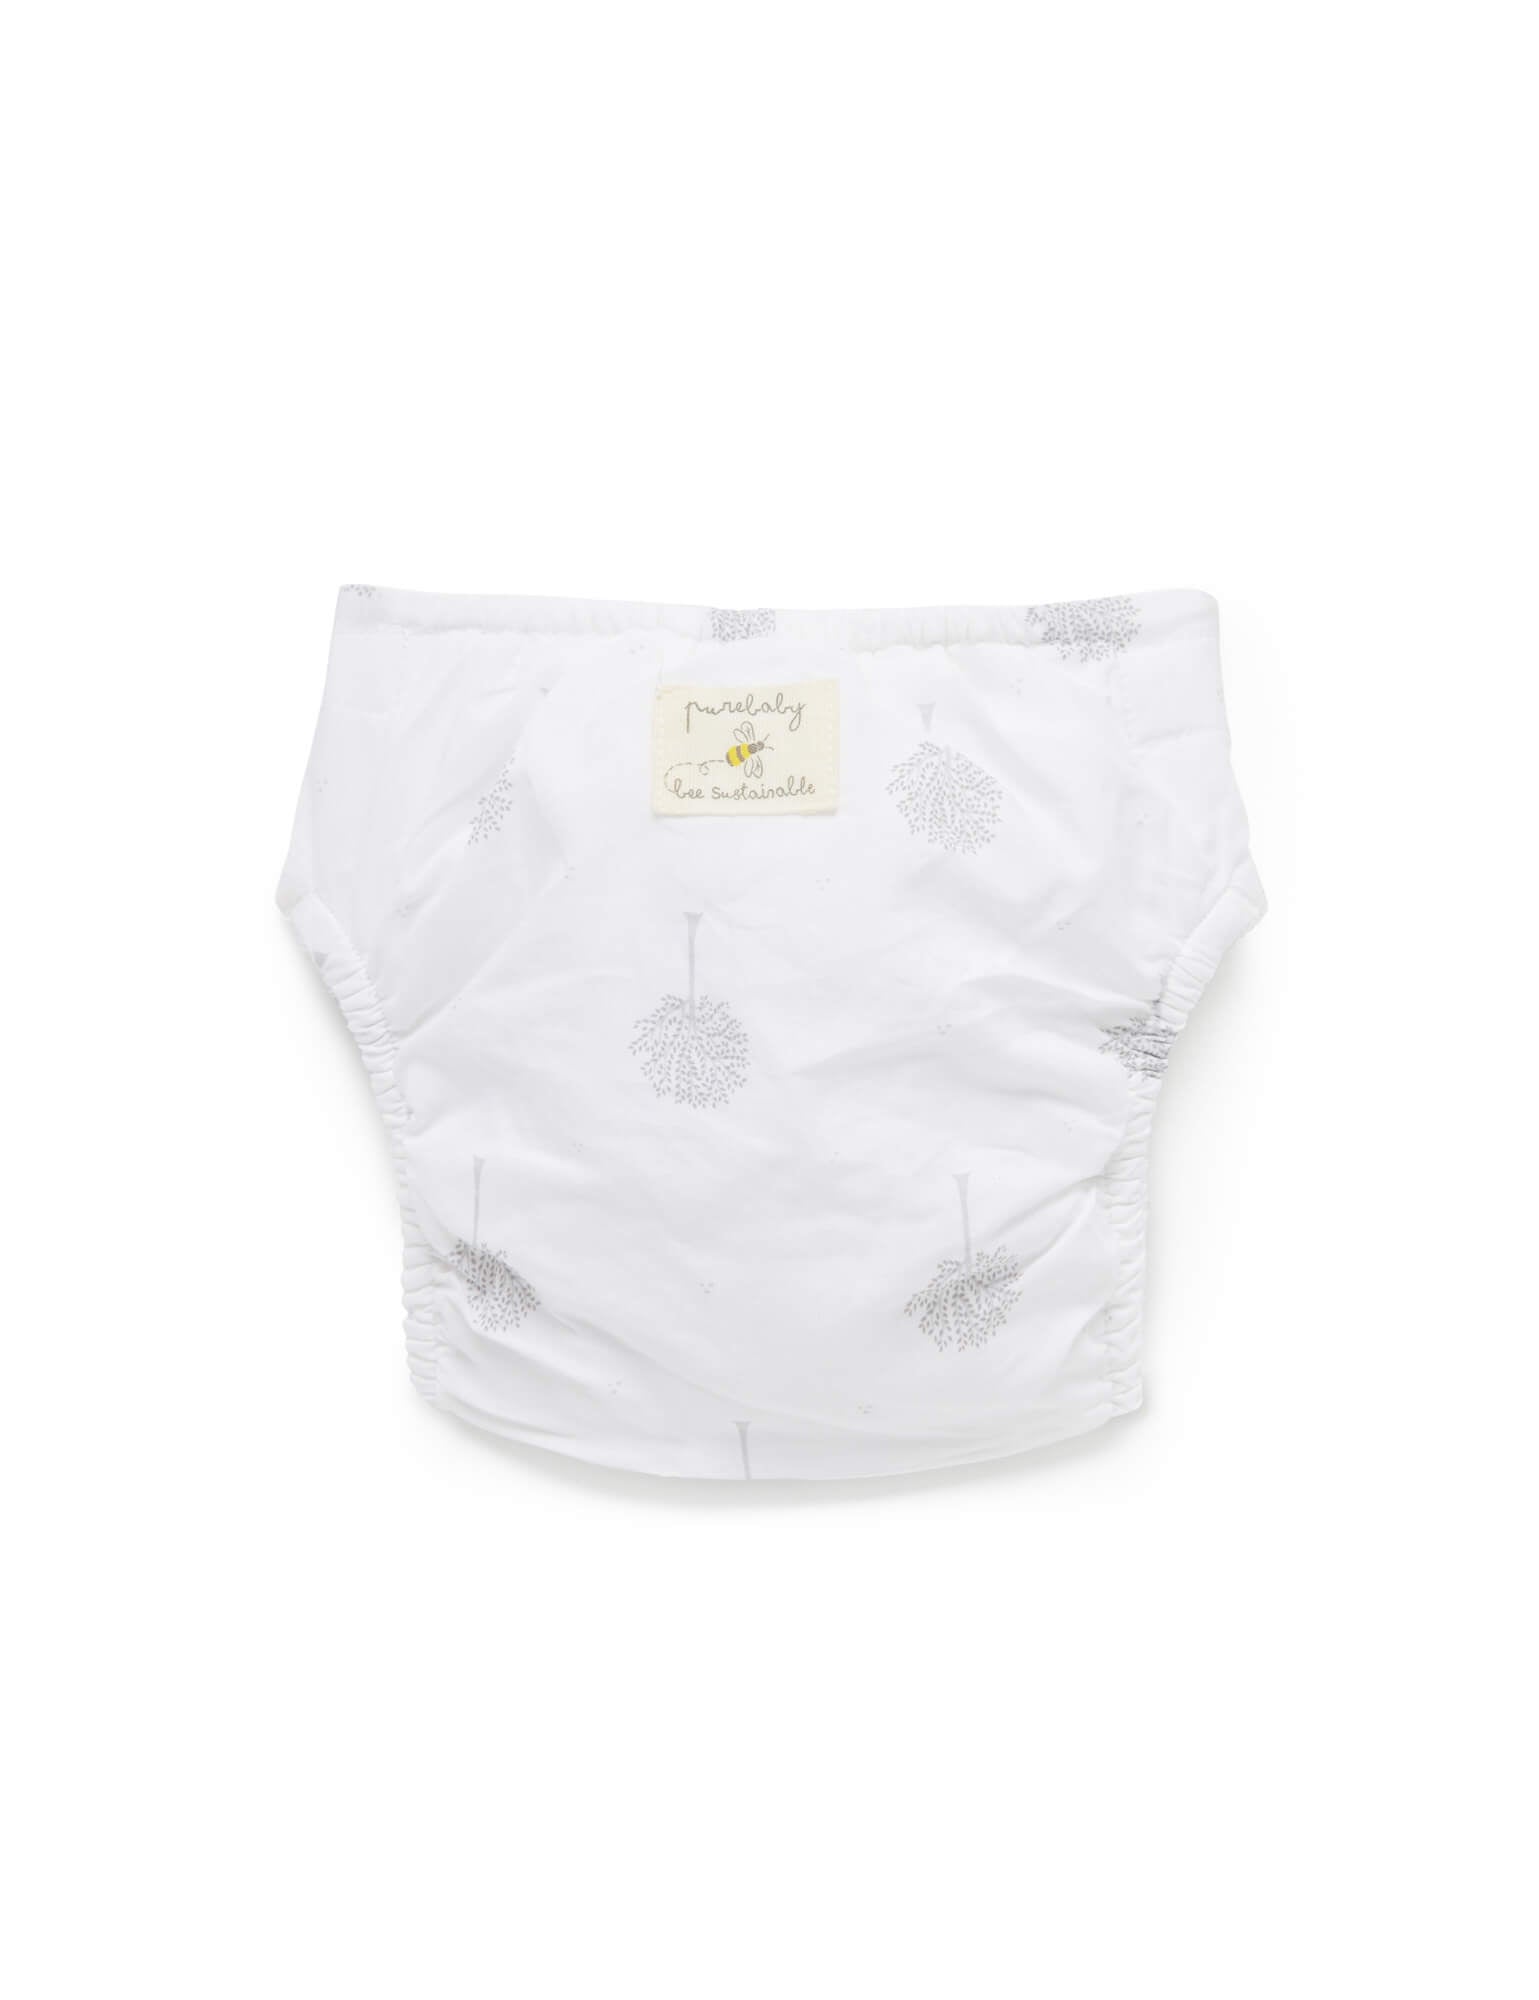 Reusable Nappy Pant in Pale Grey Tree